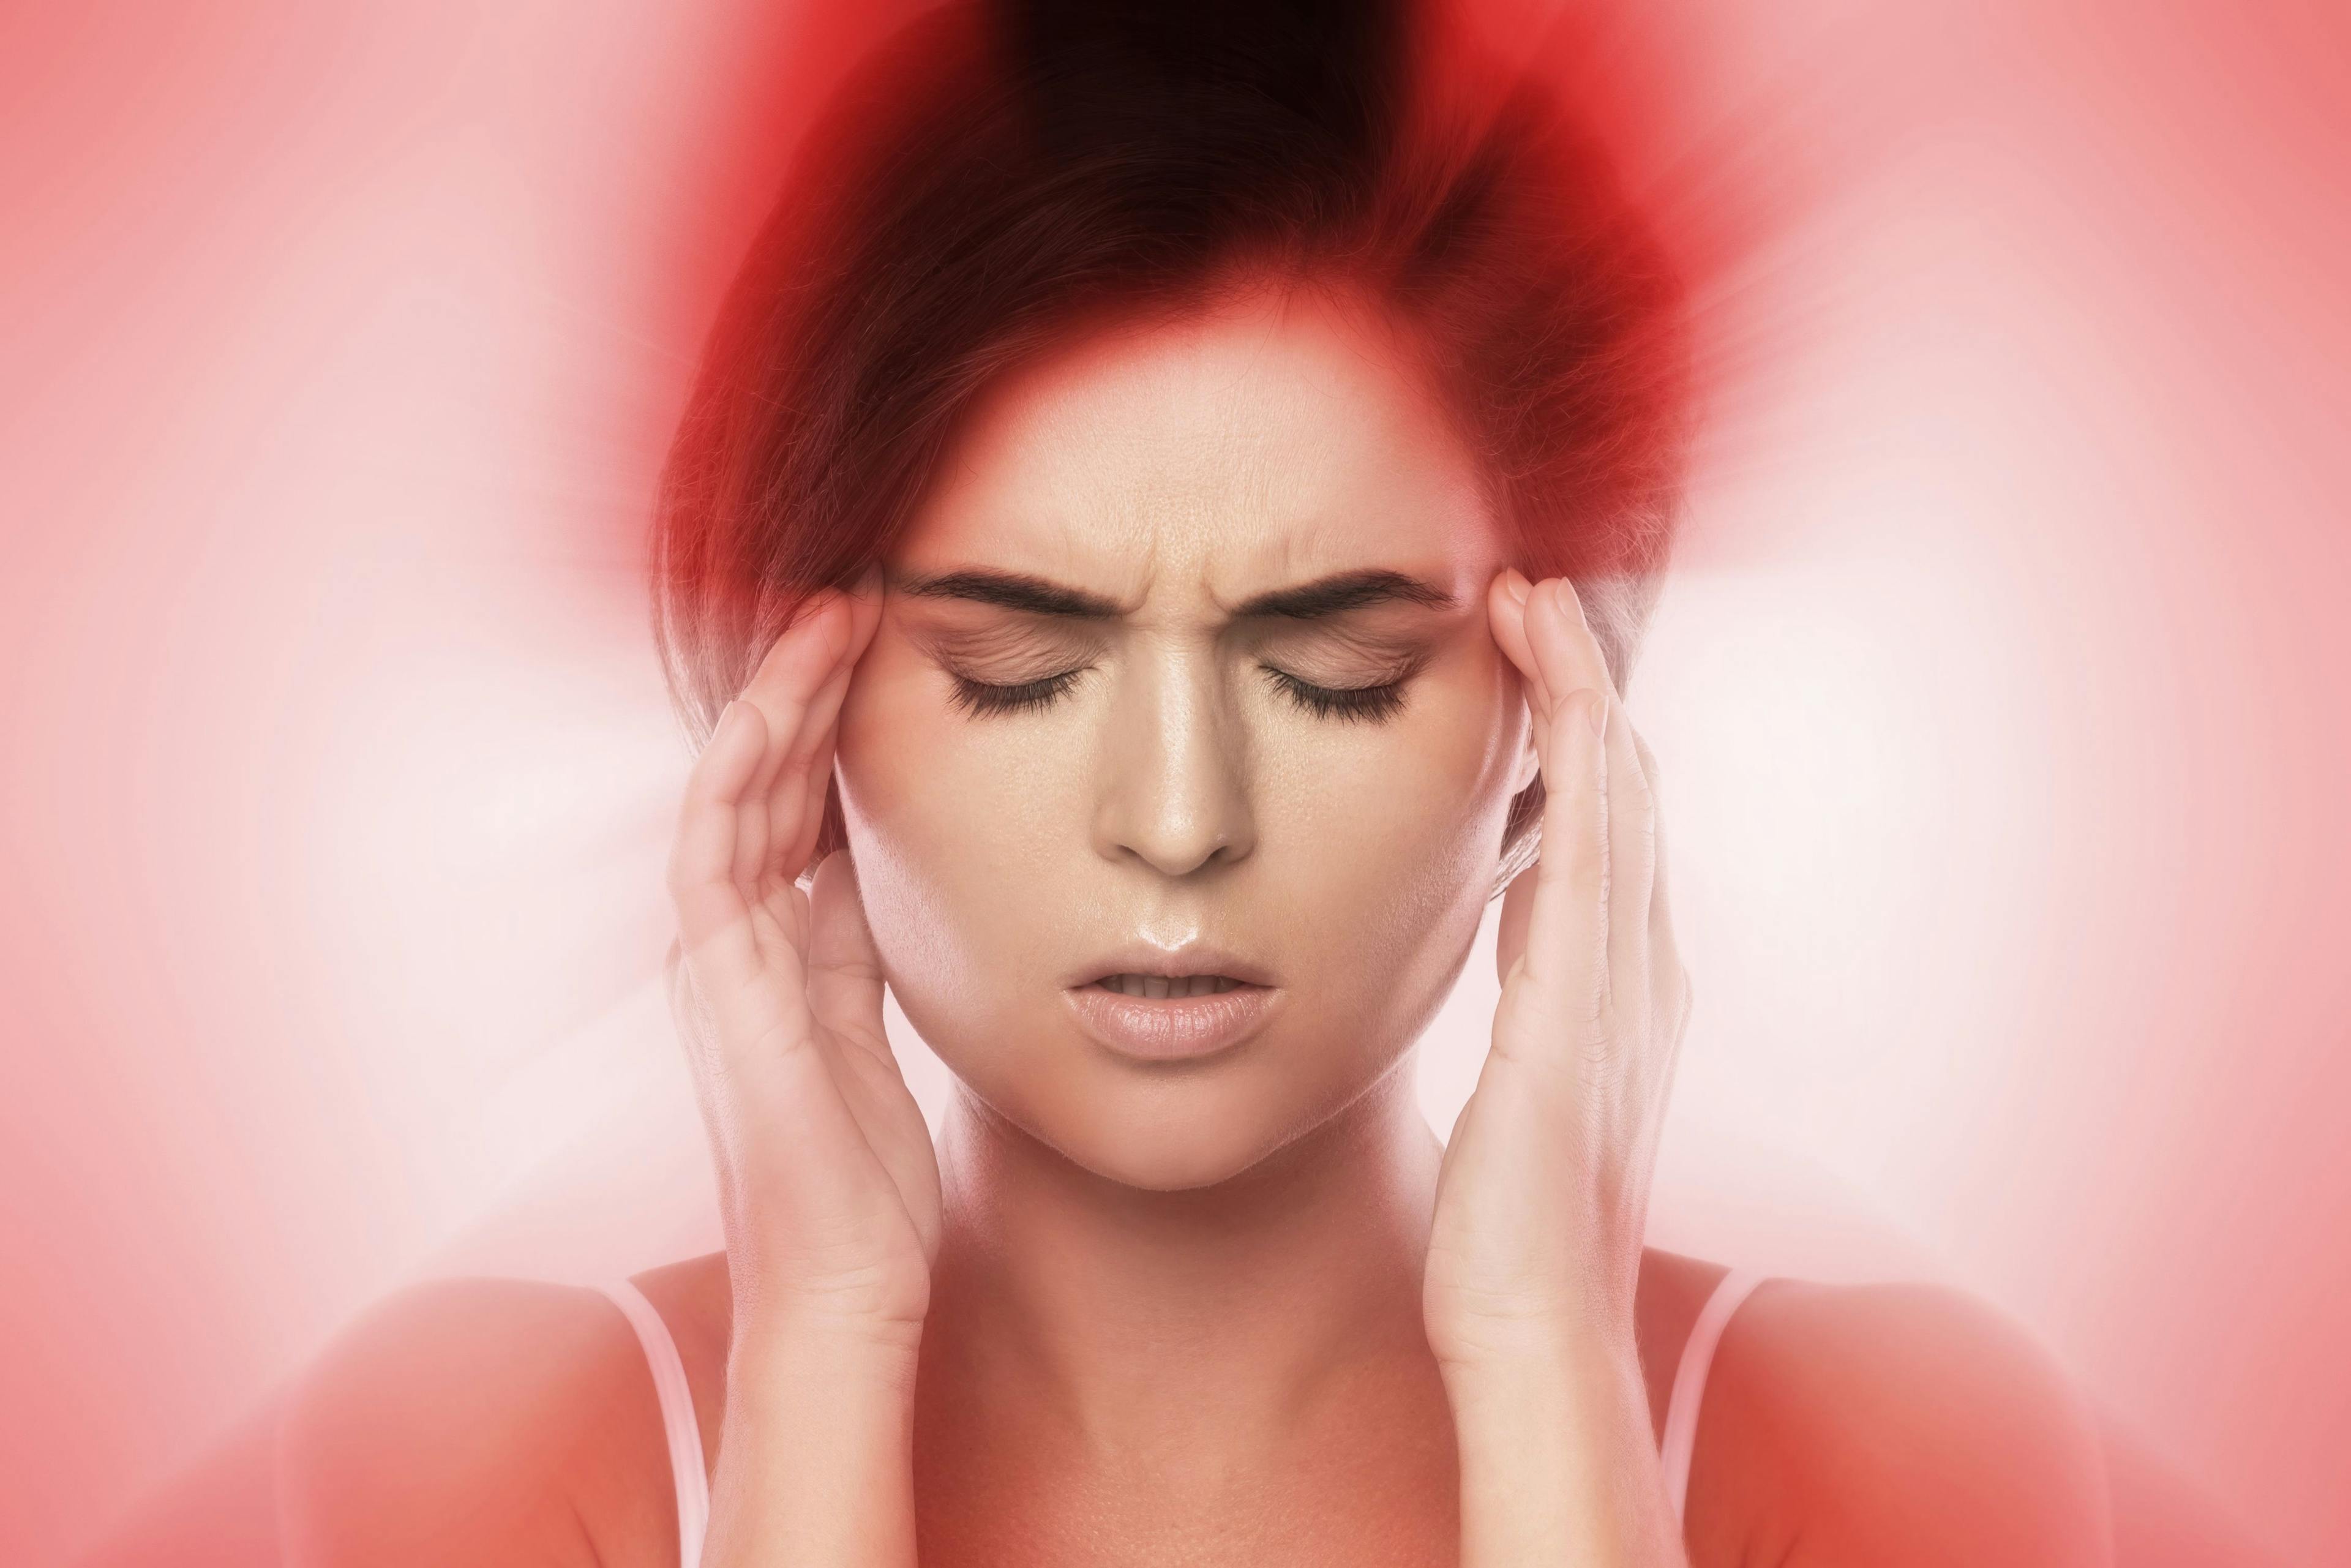 Recent Advancements in Migraine Therapies Provide Opportunity for Pharmacist Intervention